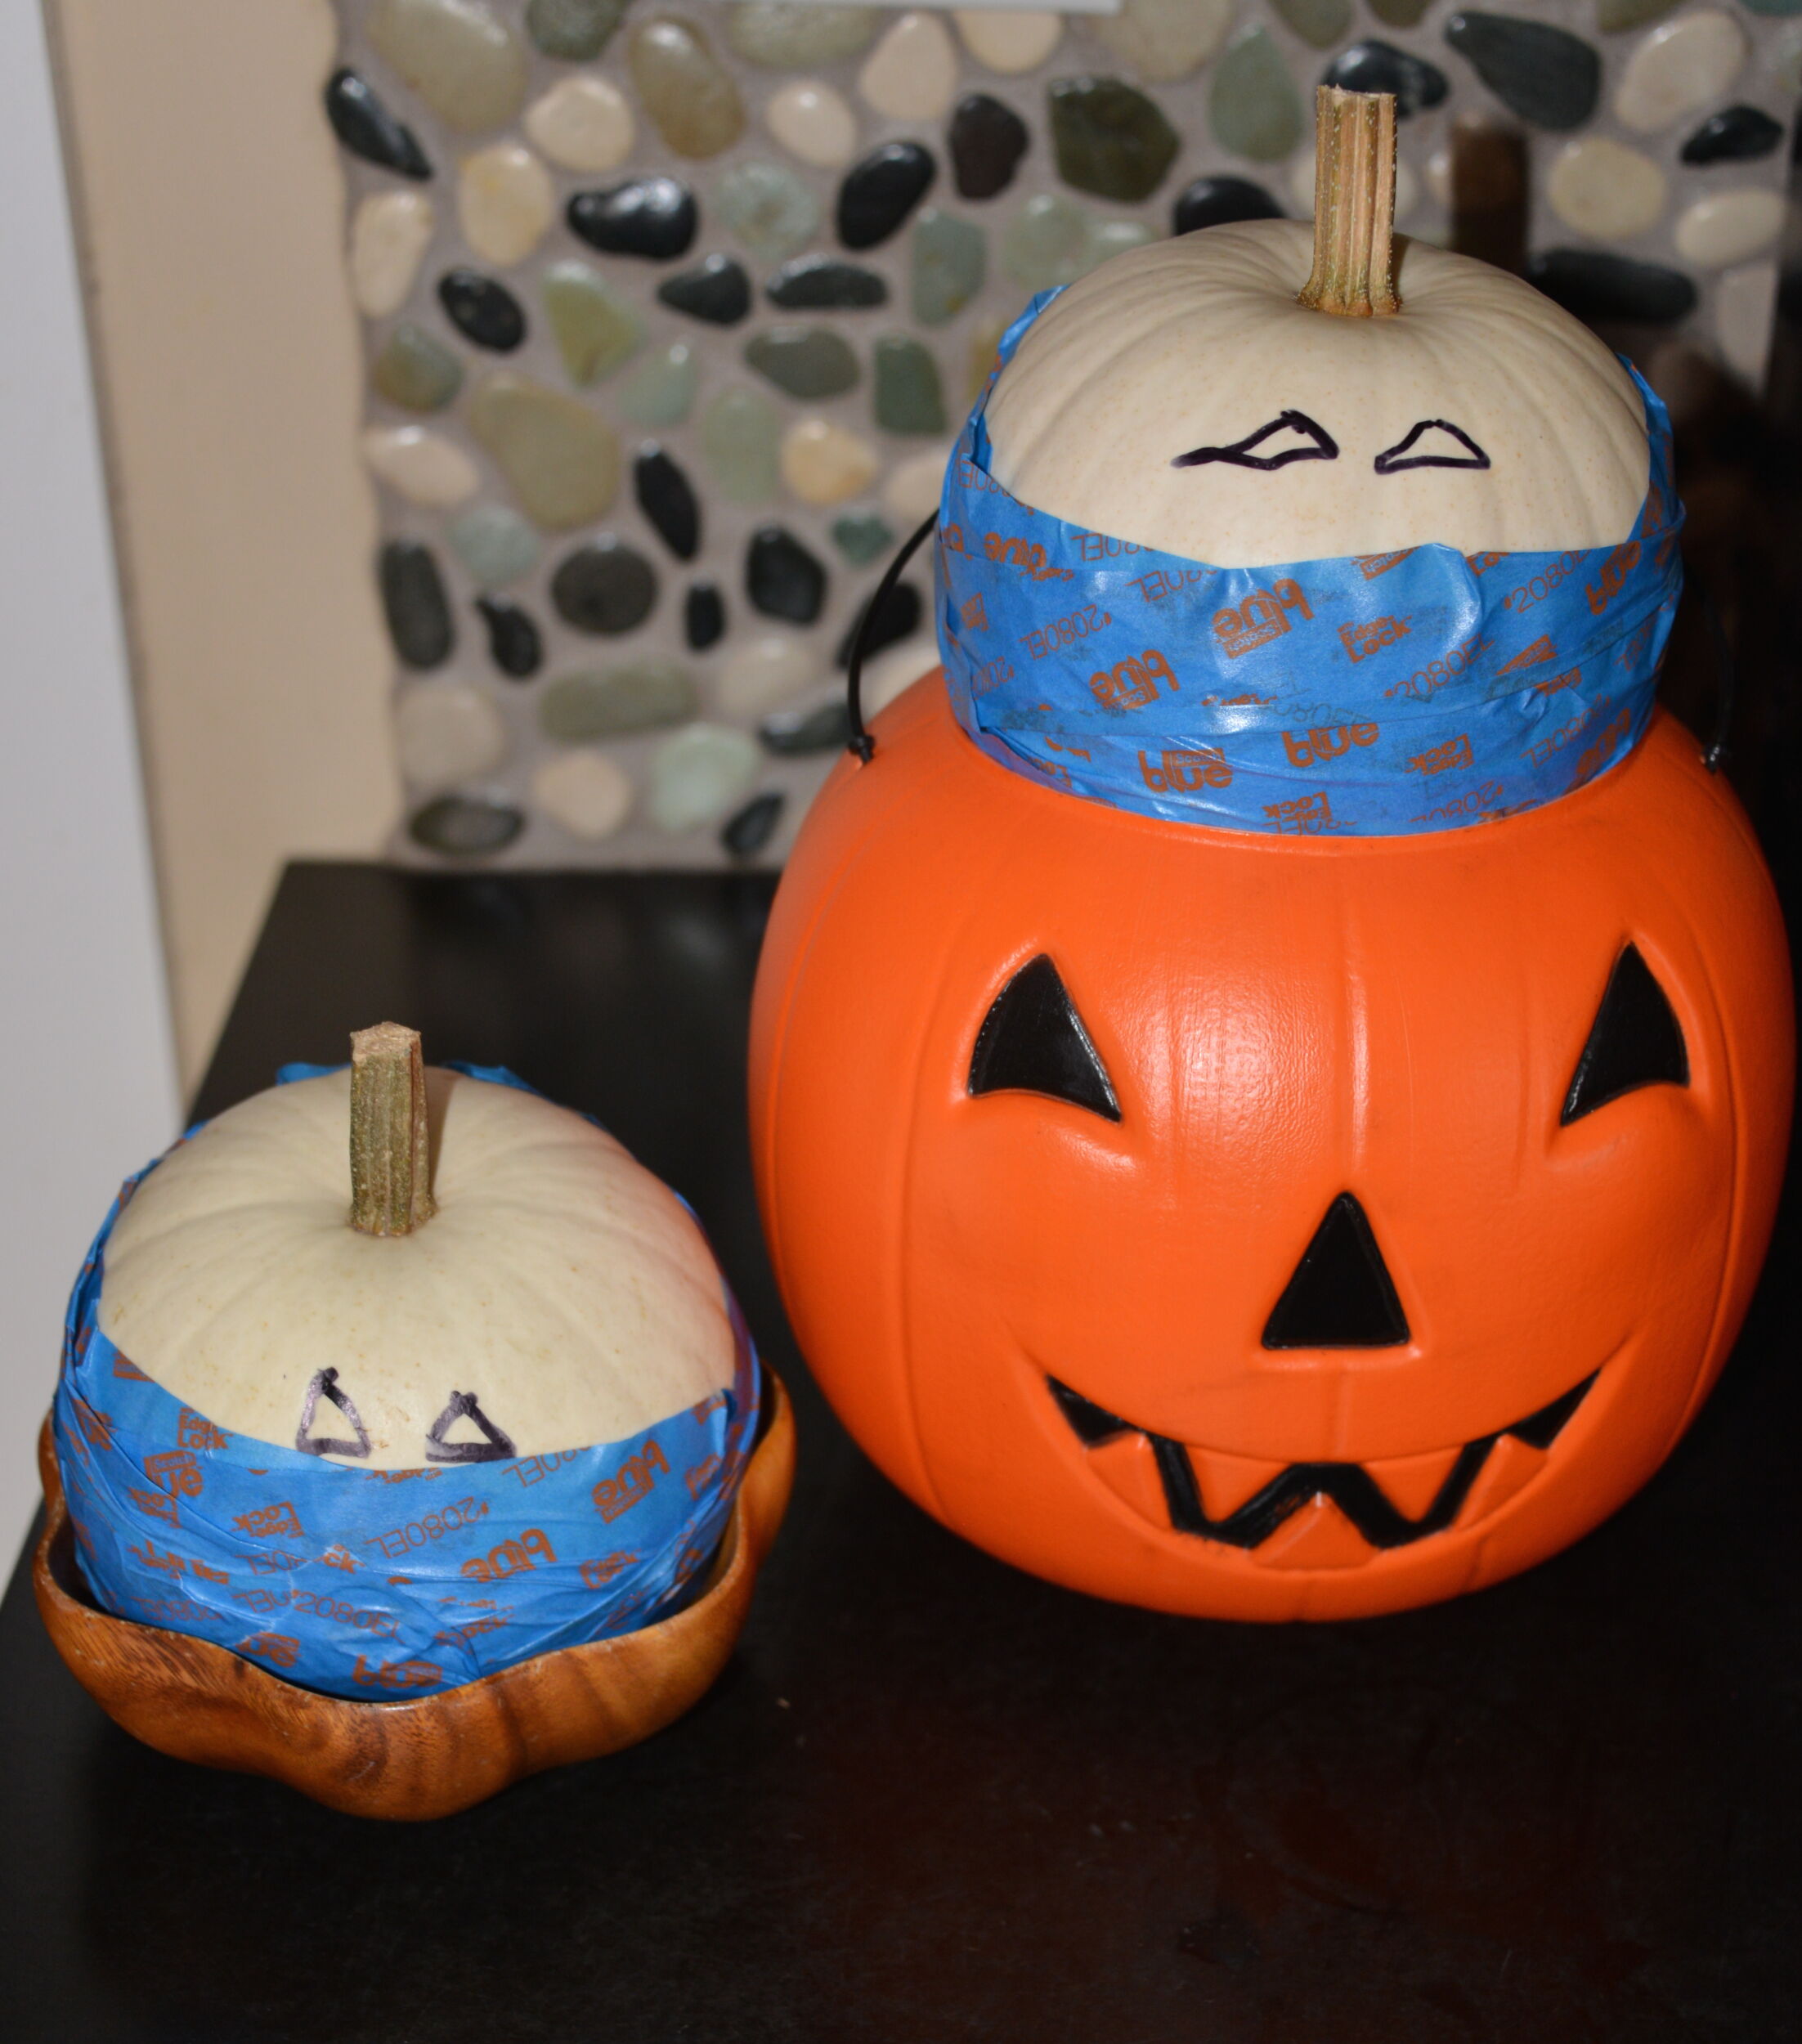 Ninja pumpkins in their coffins amazed and amused